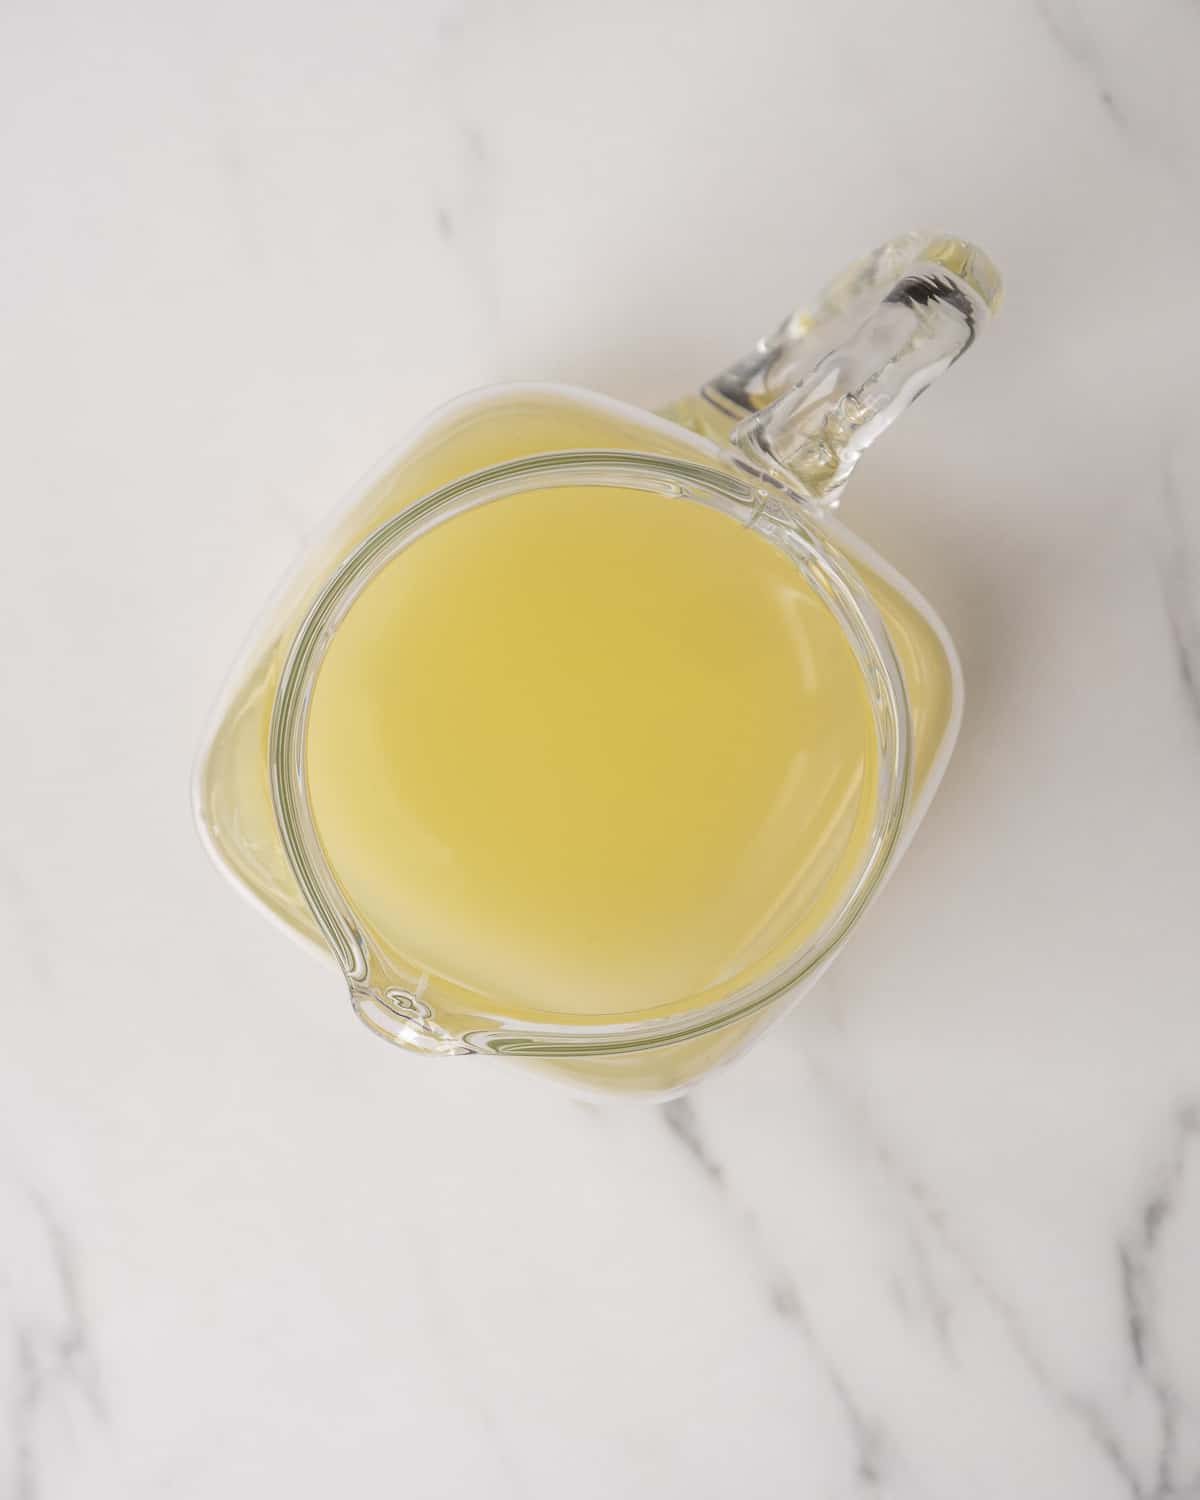 Juiced lemon in glass pitcher on a white countertop